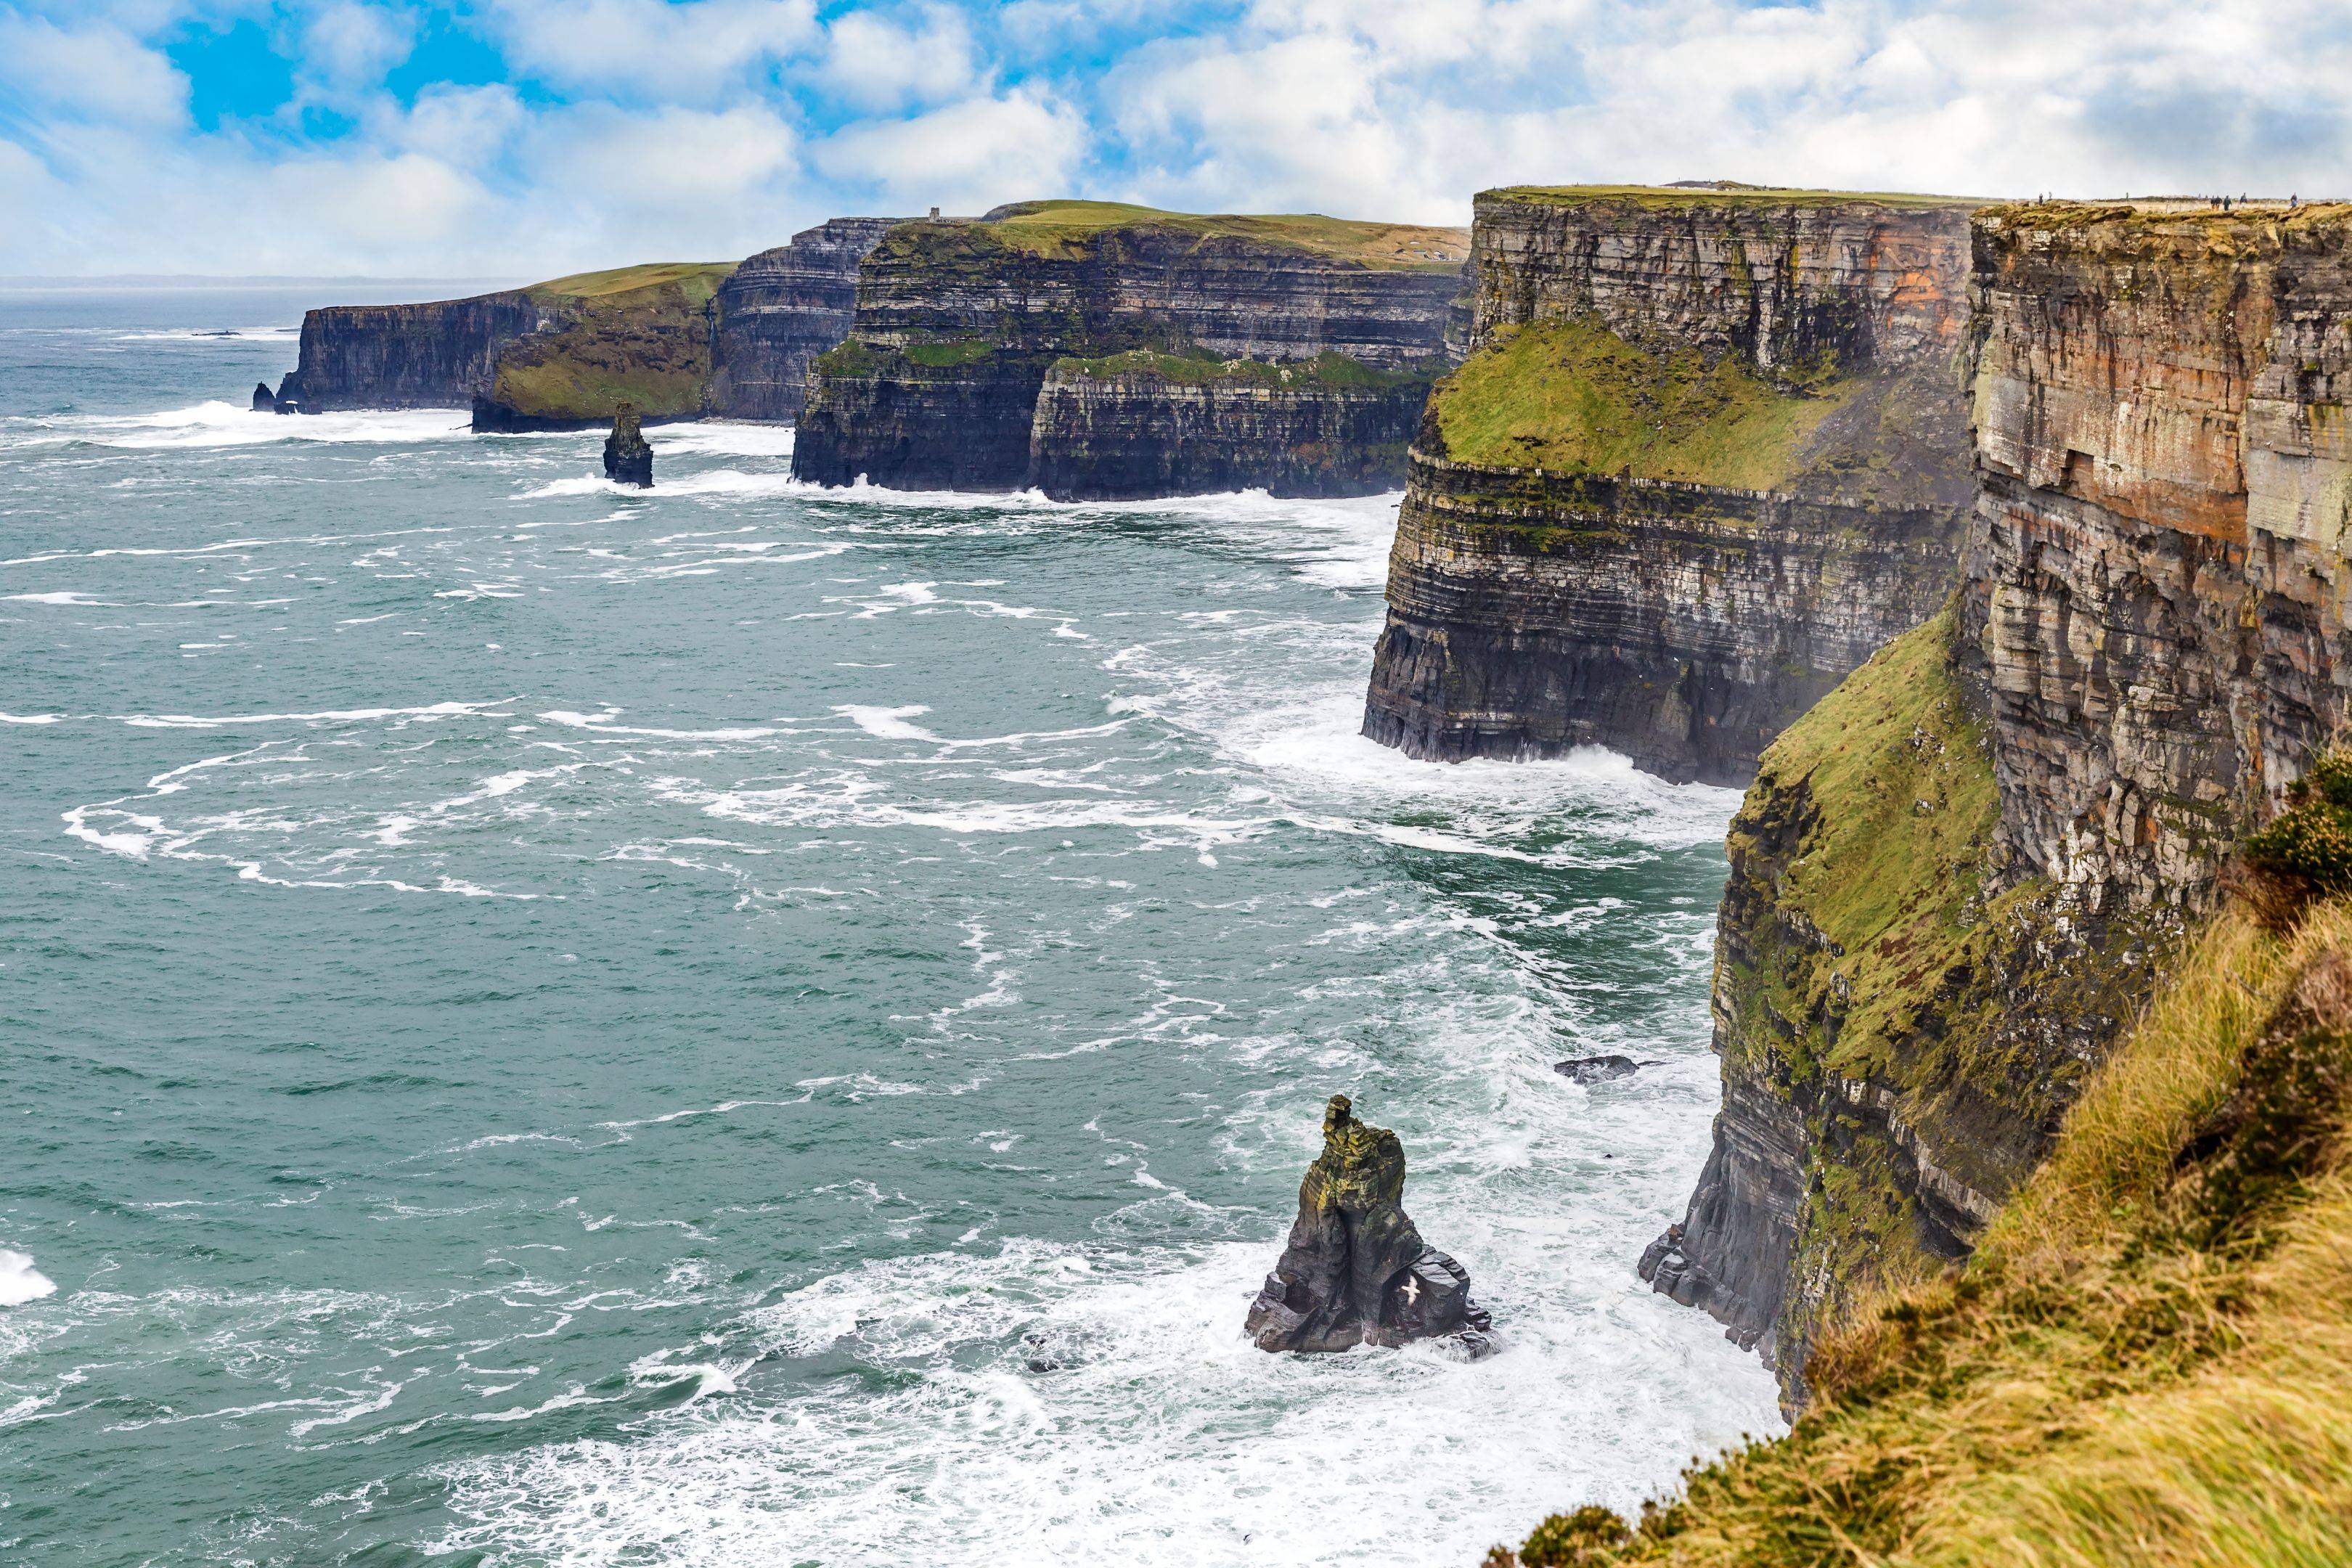 Cliffs of Moher – Cliffs of Moher Cruise - Bunratty Freilicht Museum - Dromoland 